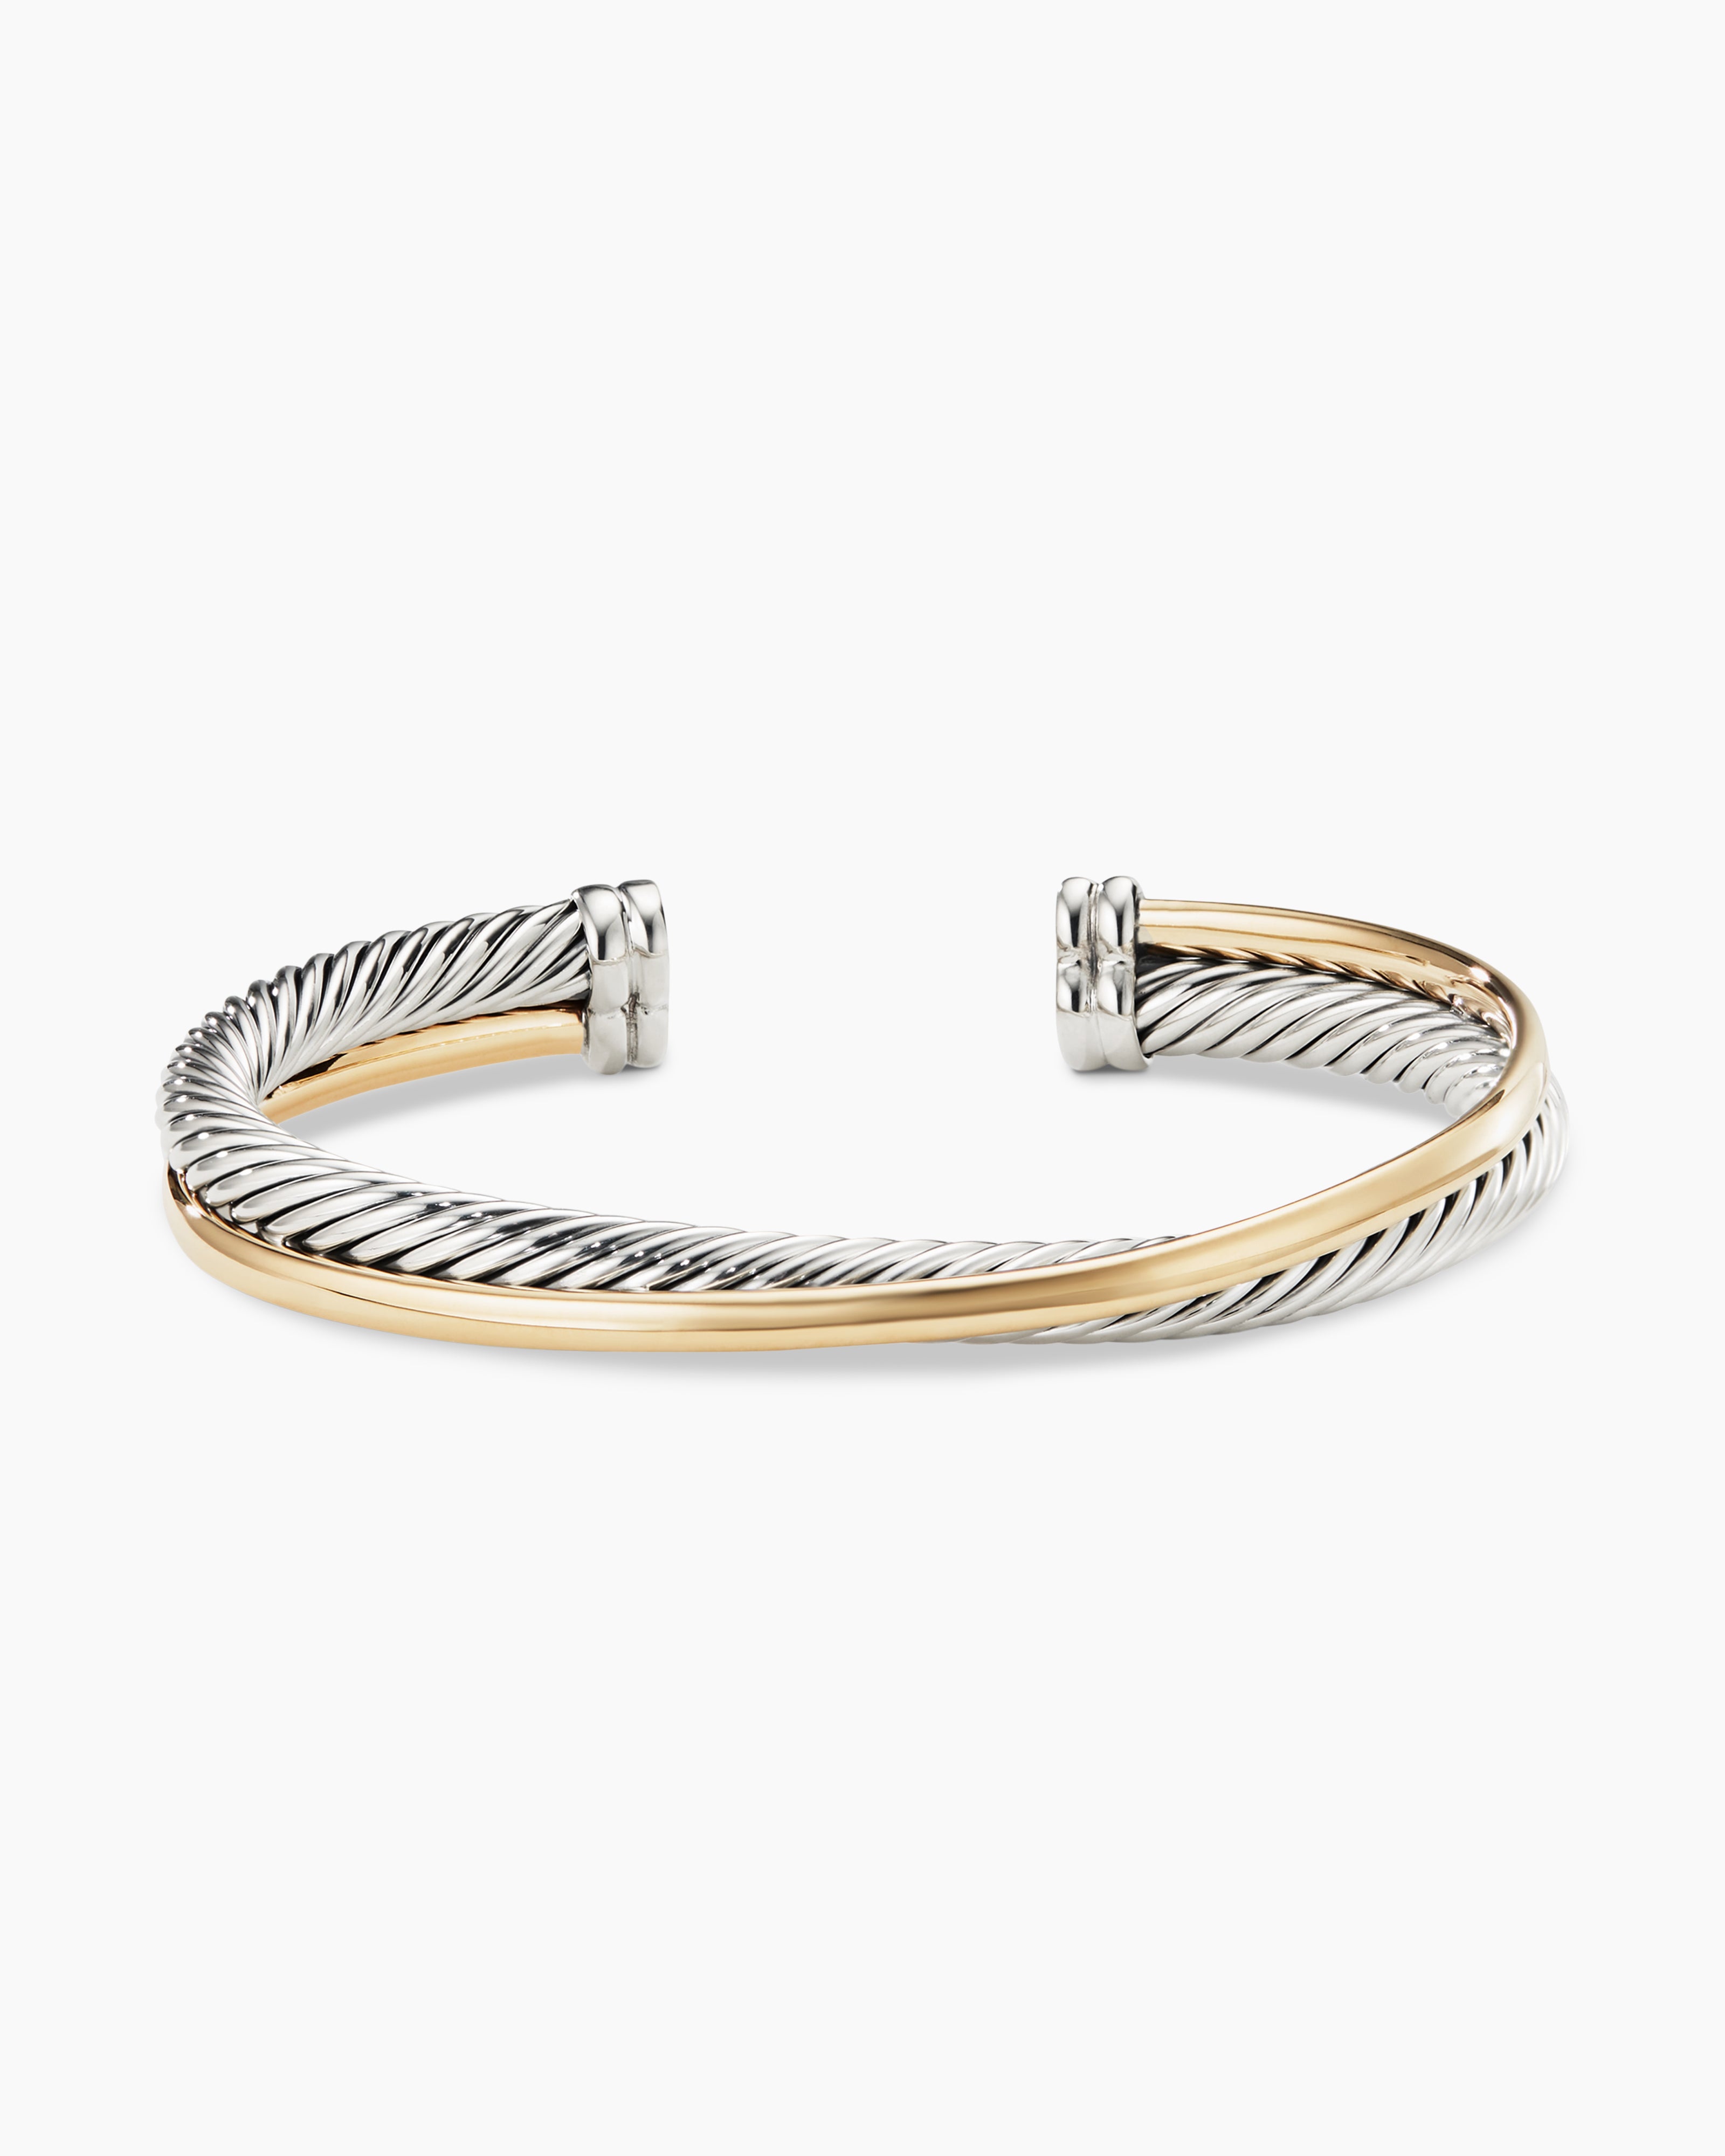 Tiffany 1837® Makers narrow chain bracelet in sterling silver and gold,  medium. | Tiffany & Co.